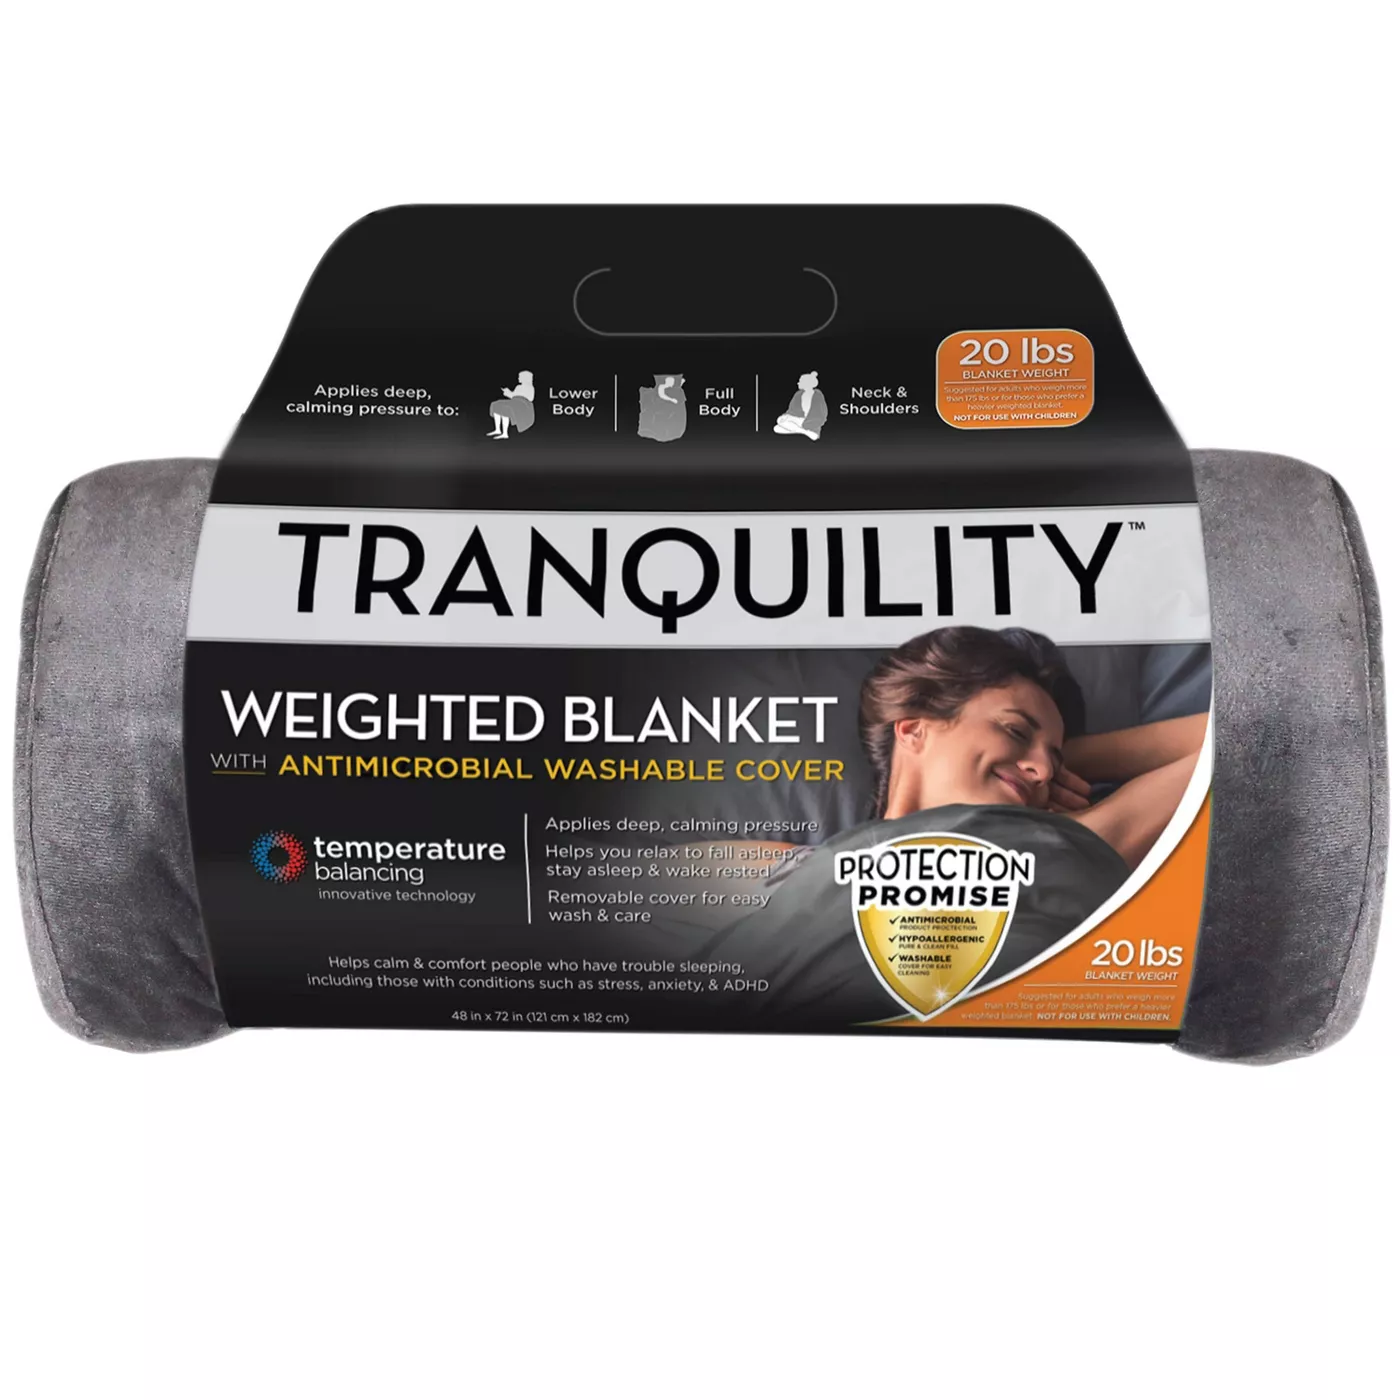 weighted blanket for better sleep quality